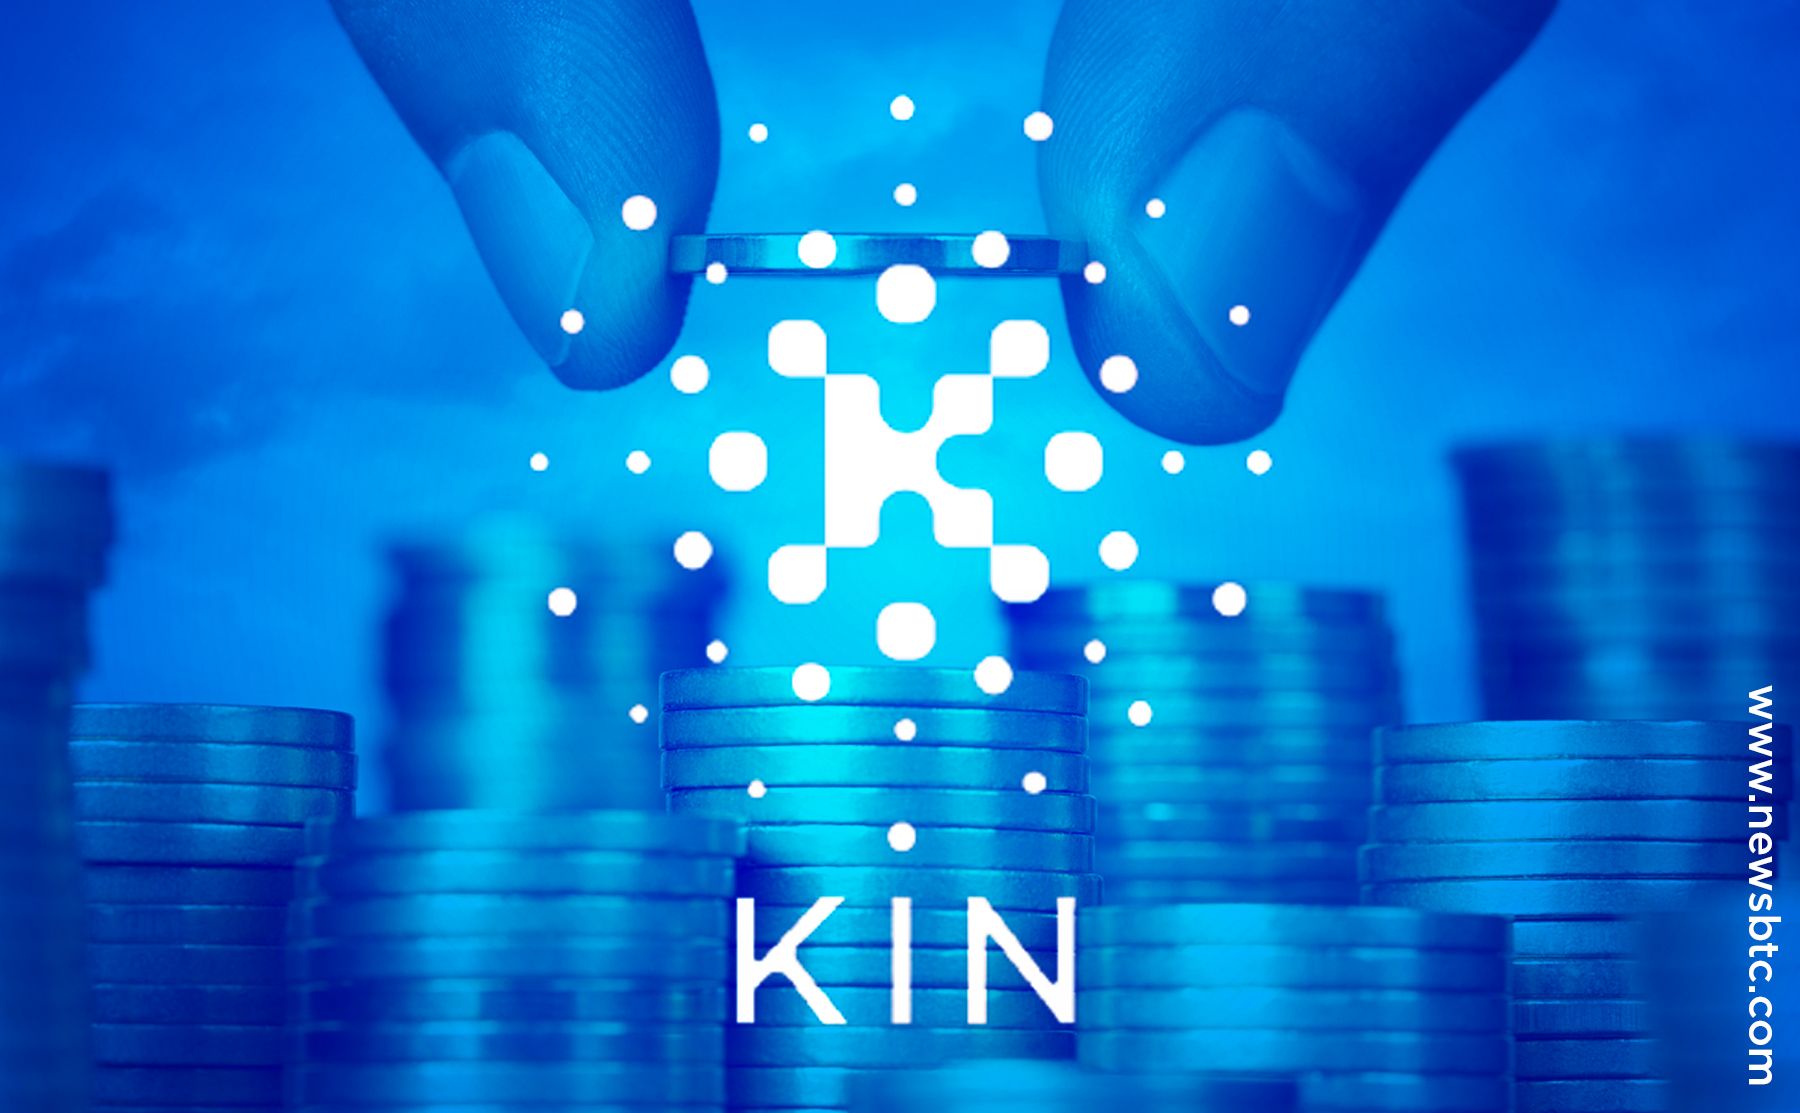 kik-to-implement-kin-cryptocurrency-ico-may-follow.jpg